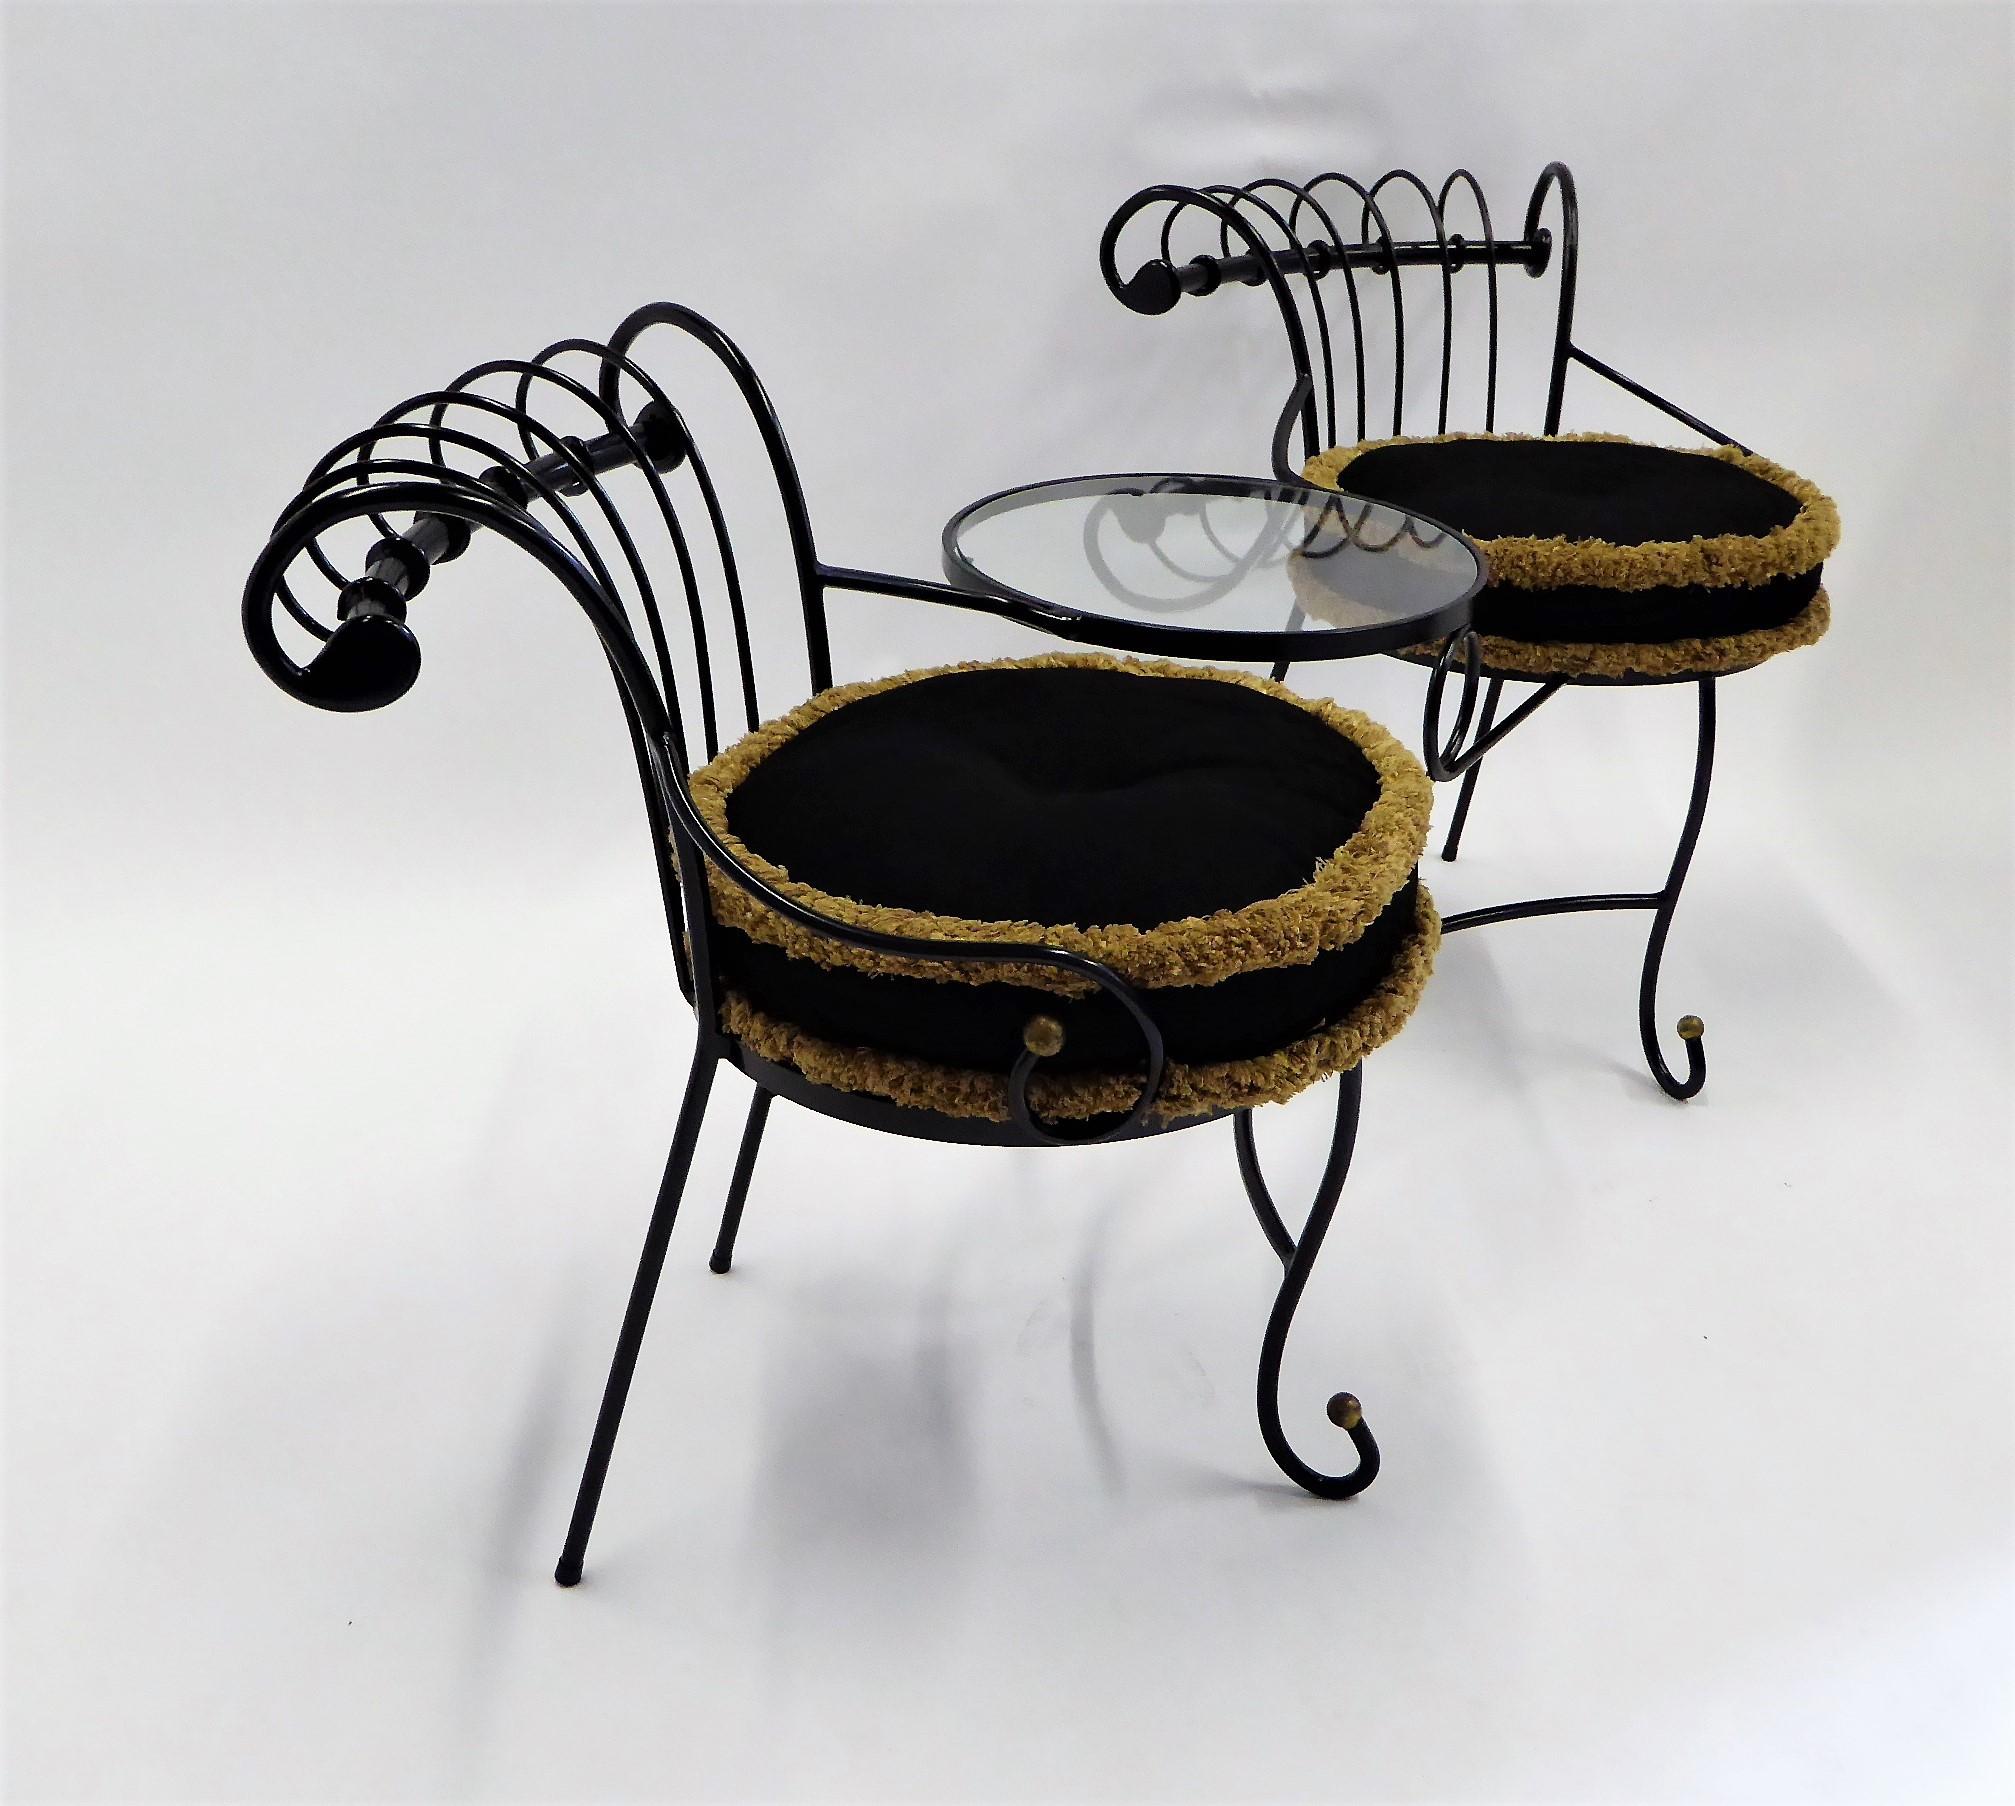 This exceptional wrought iron Tete a Tete or settee is either French or Italian and is heavily influenced by the designs of Maurizio Tempestini for Salterini. Having a small circular glass table between the seats and a curved design on the seatbacks